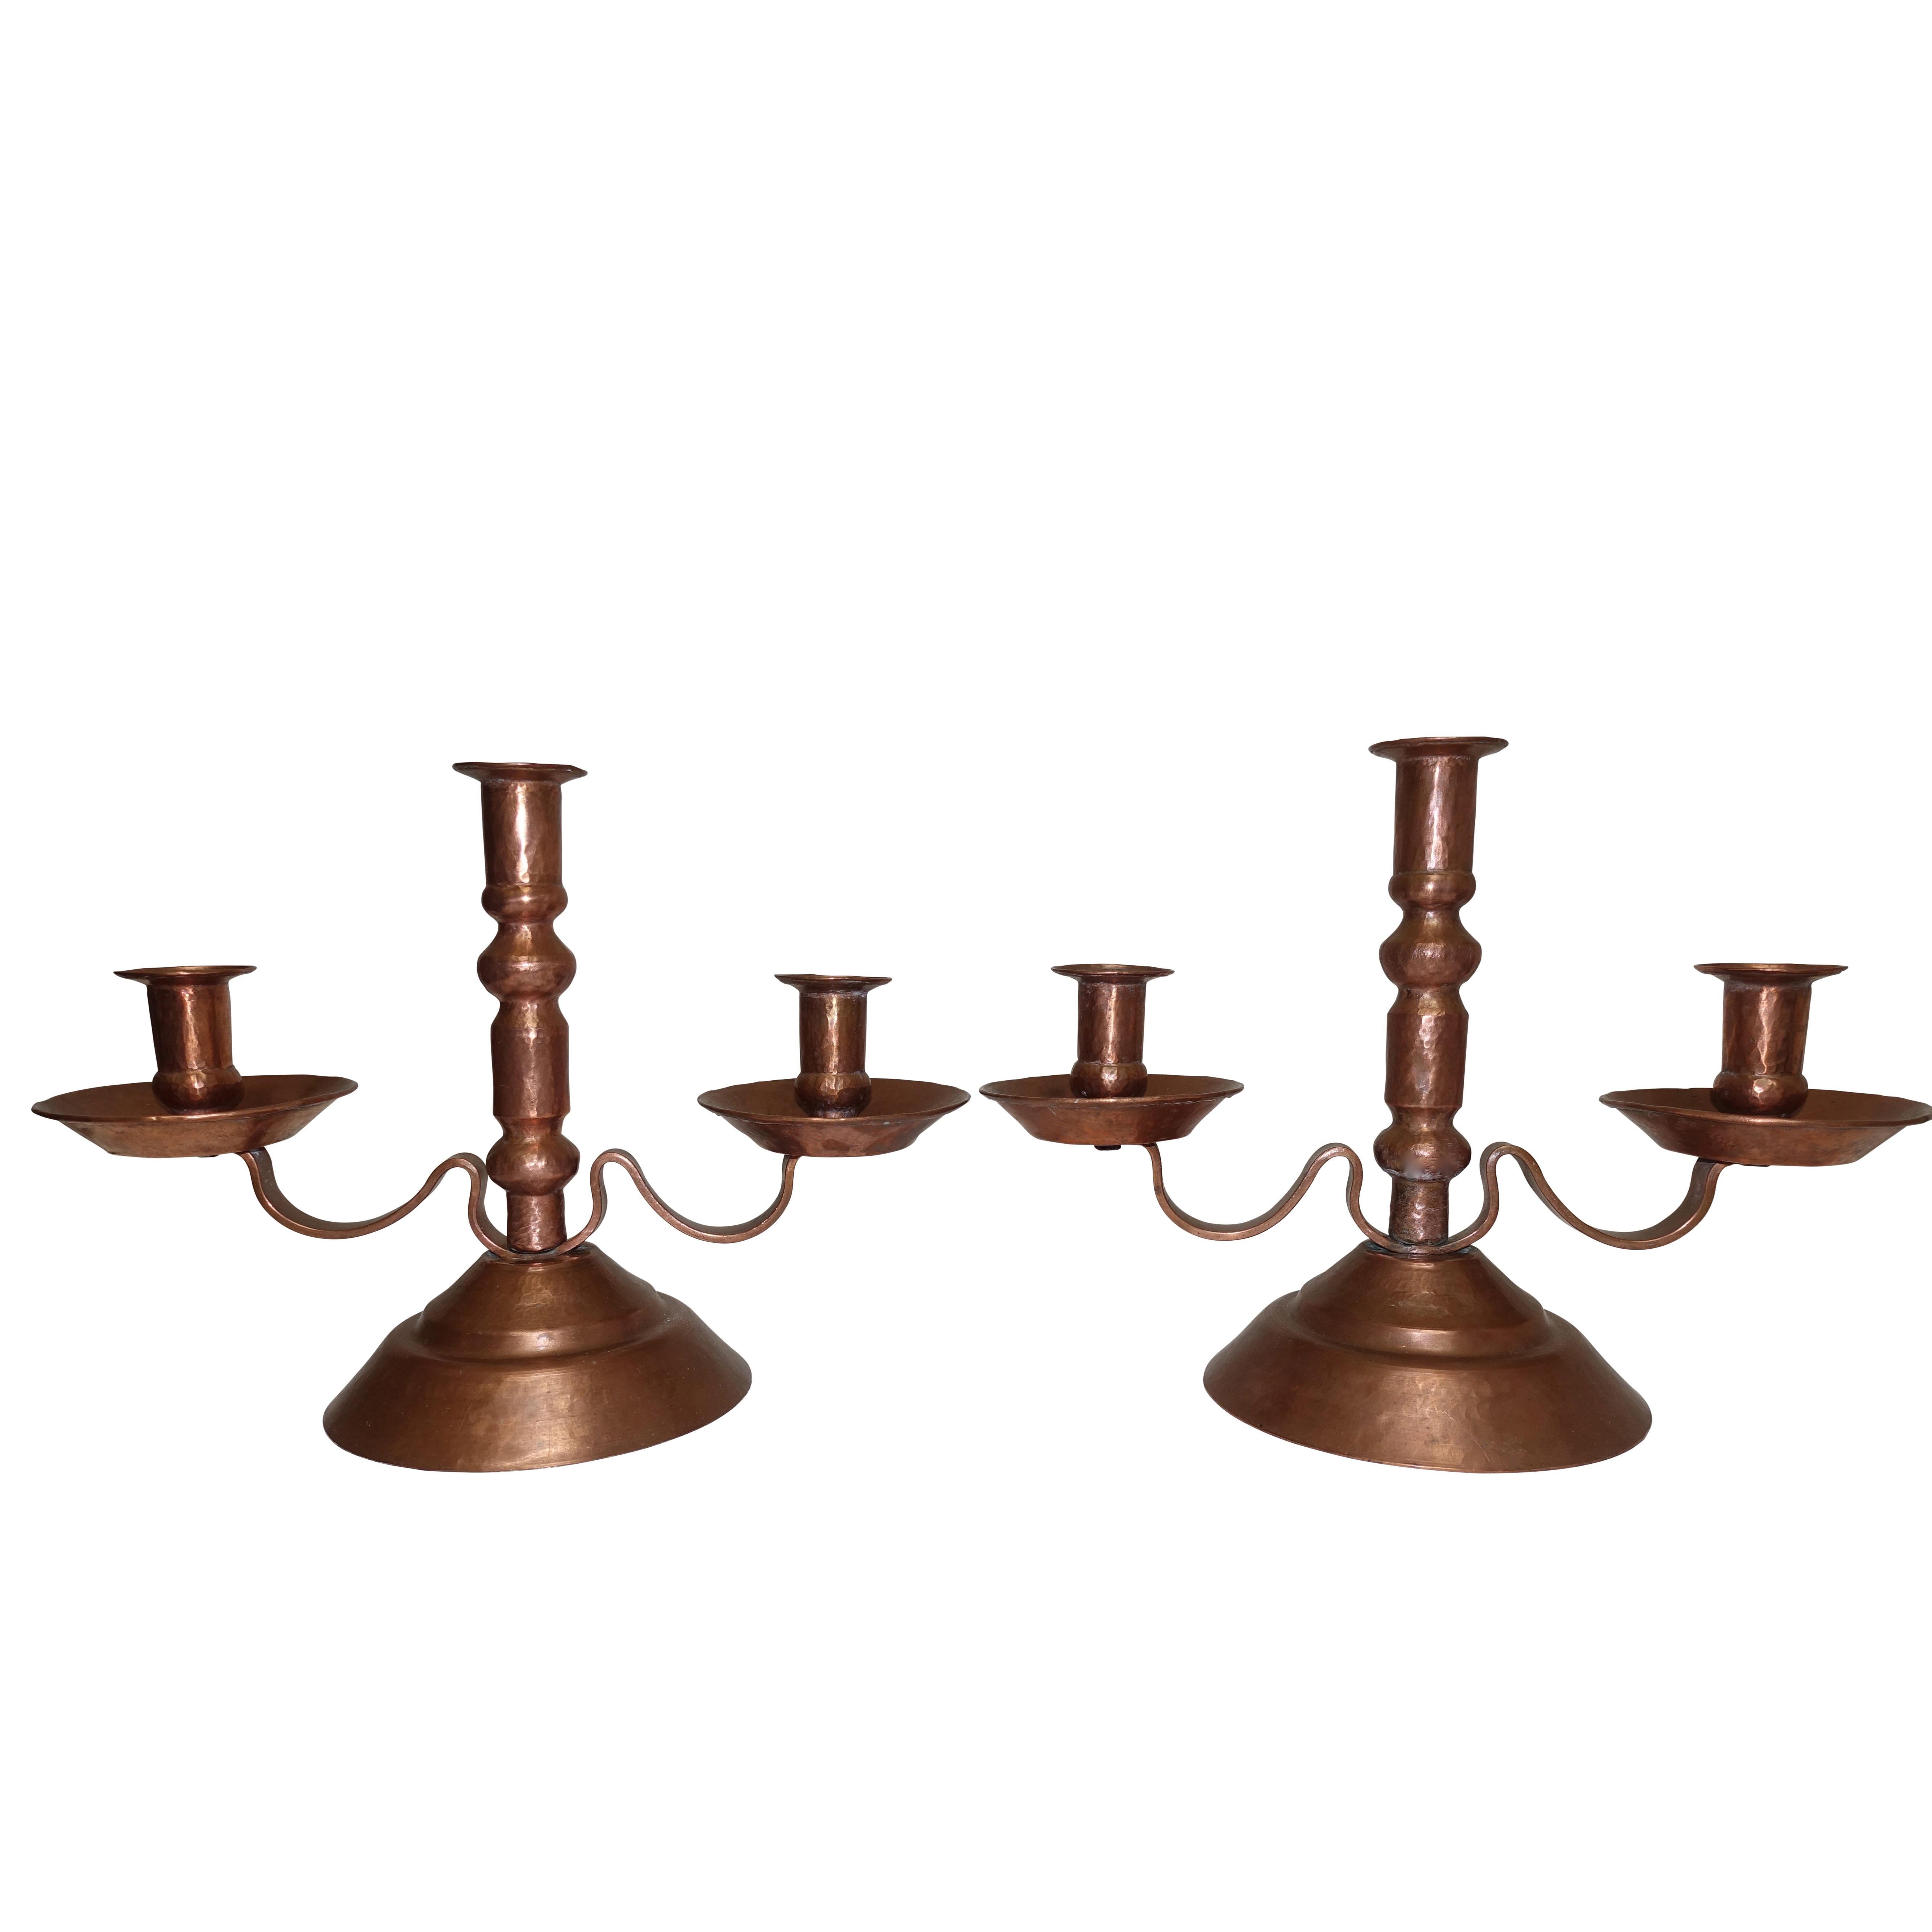 Hammered Copper Candleholders, Mexican, Early to Mid-20th Century For Sale